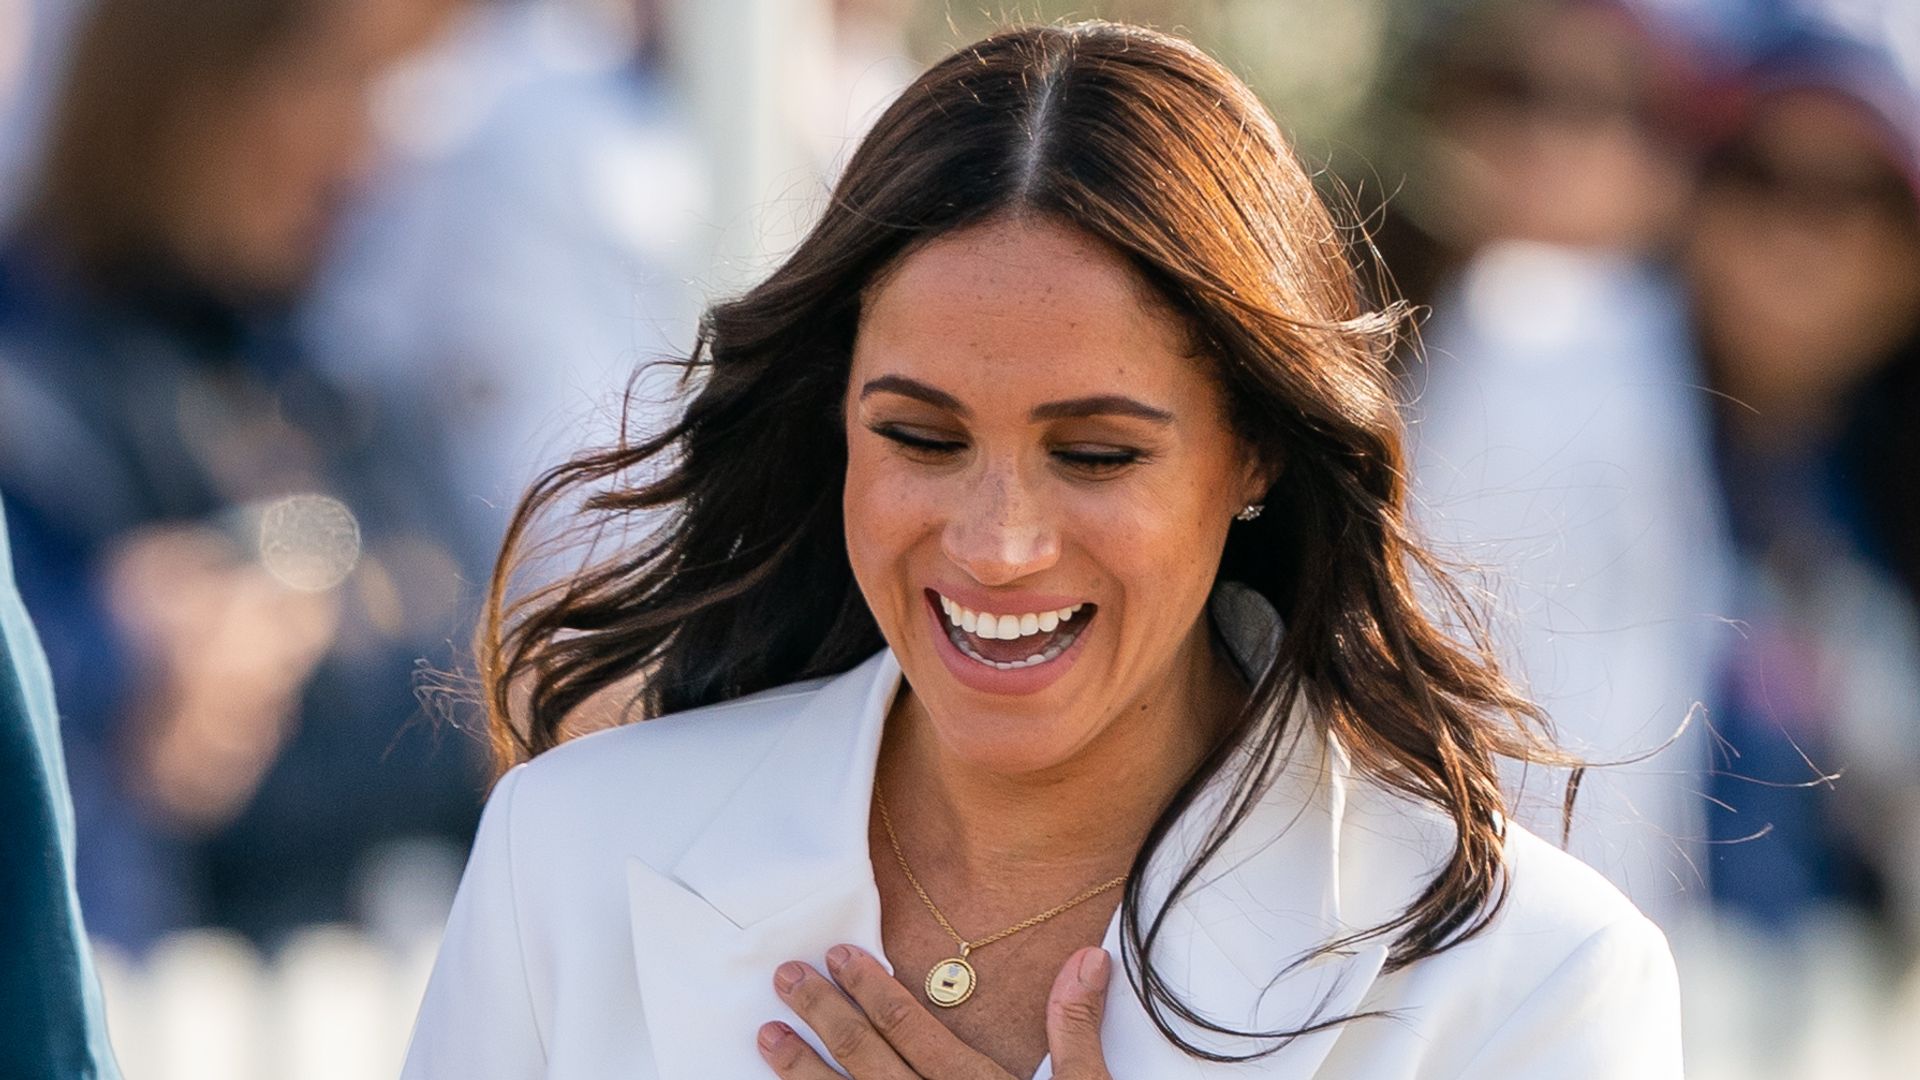 Meghan Markle gives son Archie a piggyback in endless garden in clip you might have missed